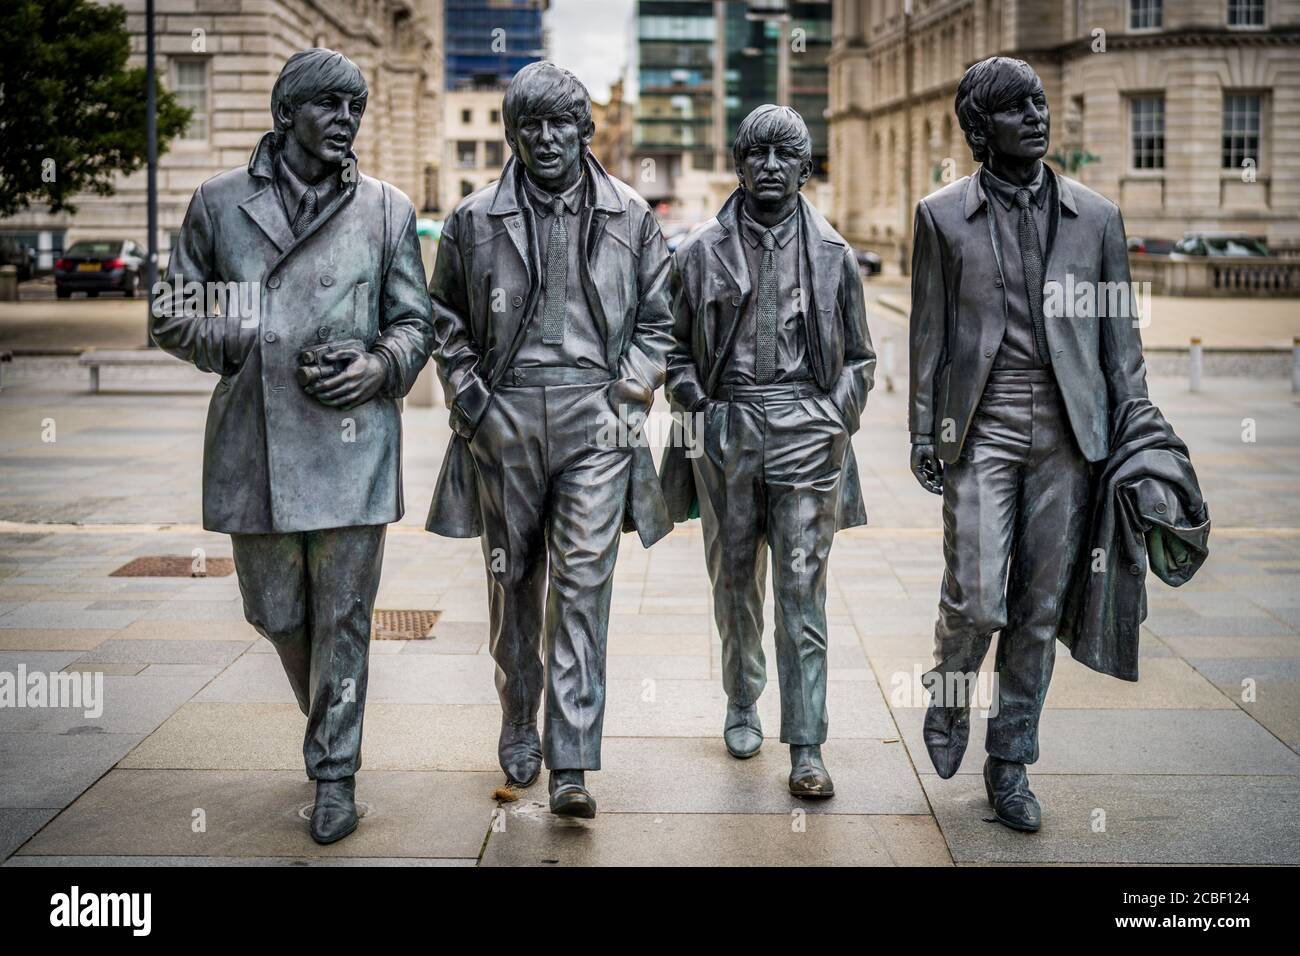 The Beatles Statue Liverpool - life size statues of the Fab Four on Liverpool's waterfront at Pier Head, sculptor Andrew Edwards erected 2015. Stock Photo